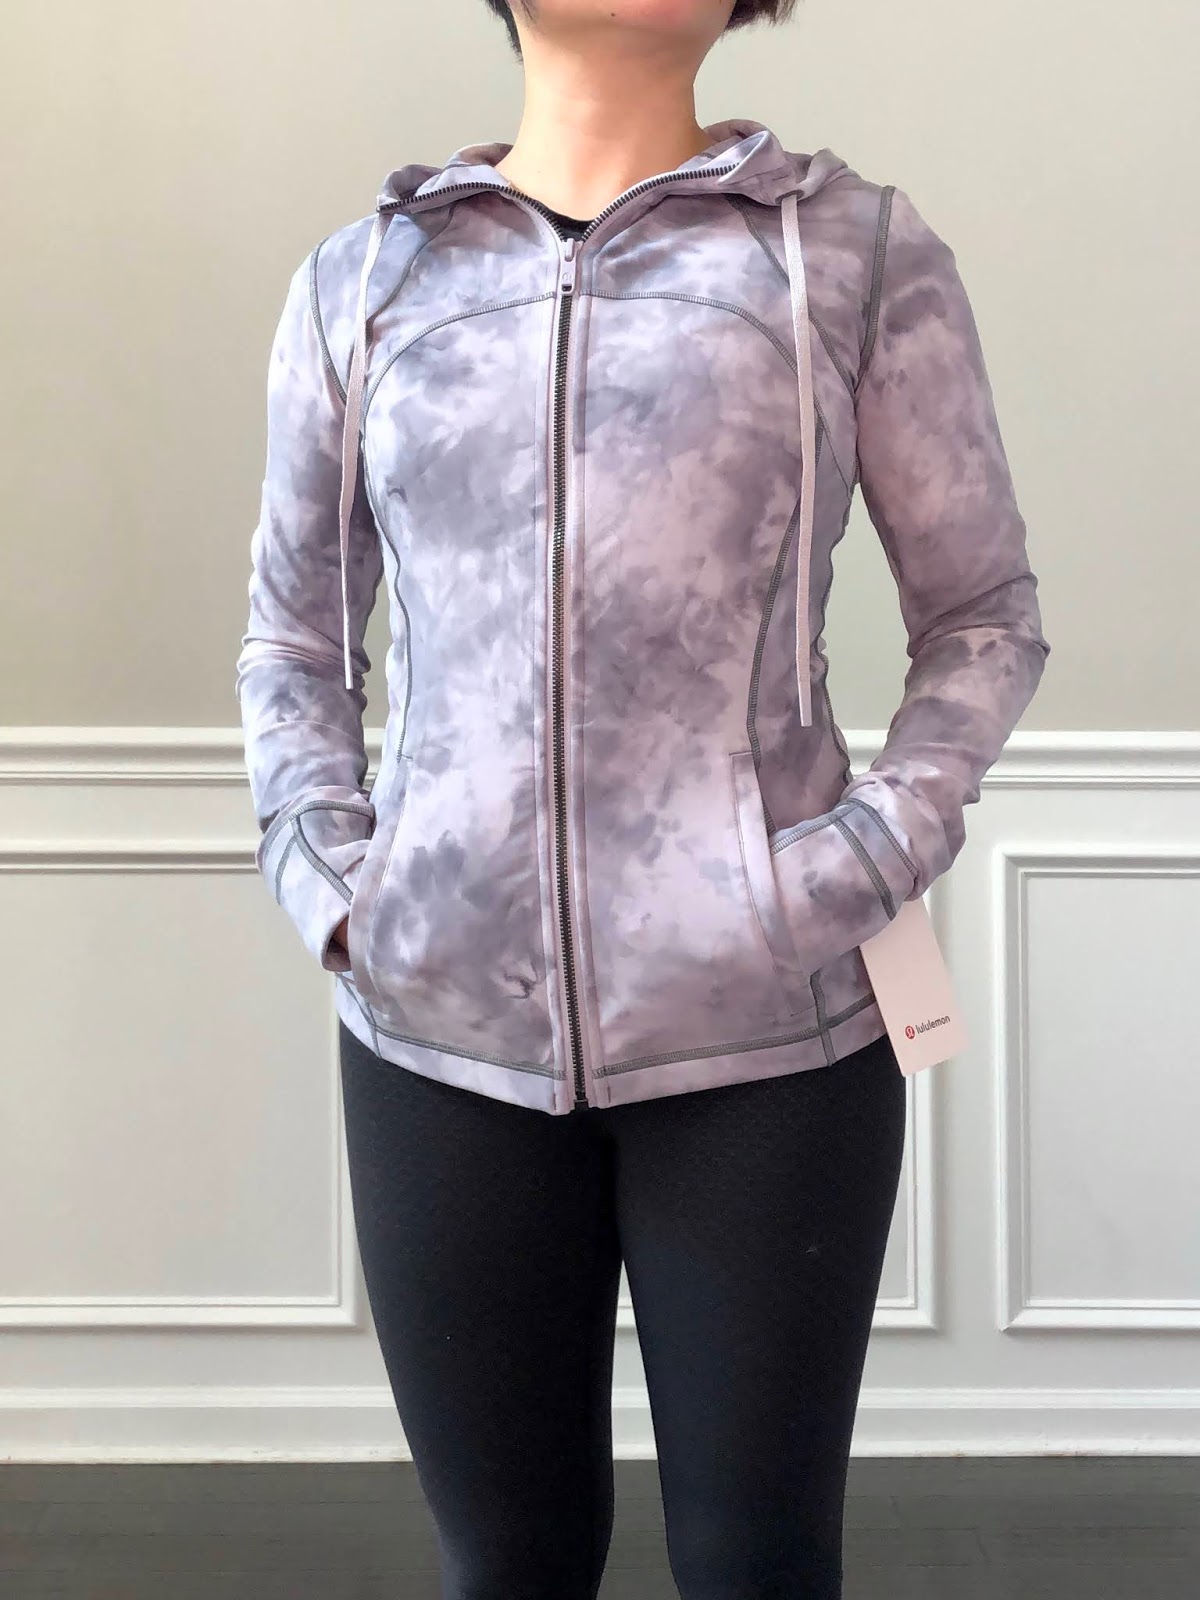 Fit Review Friday! Hooded Define Jacket Graphite Gray and Stargaze